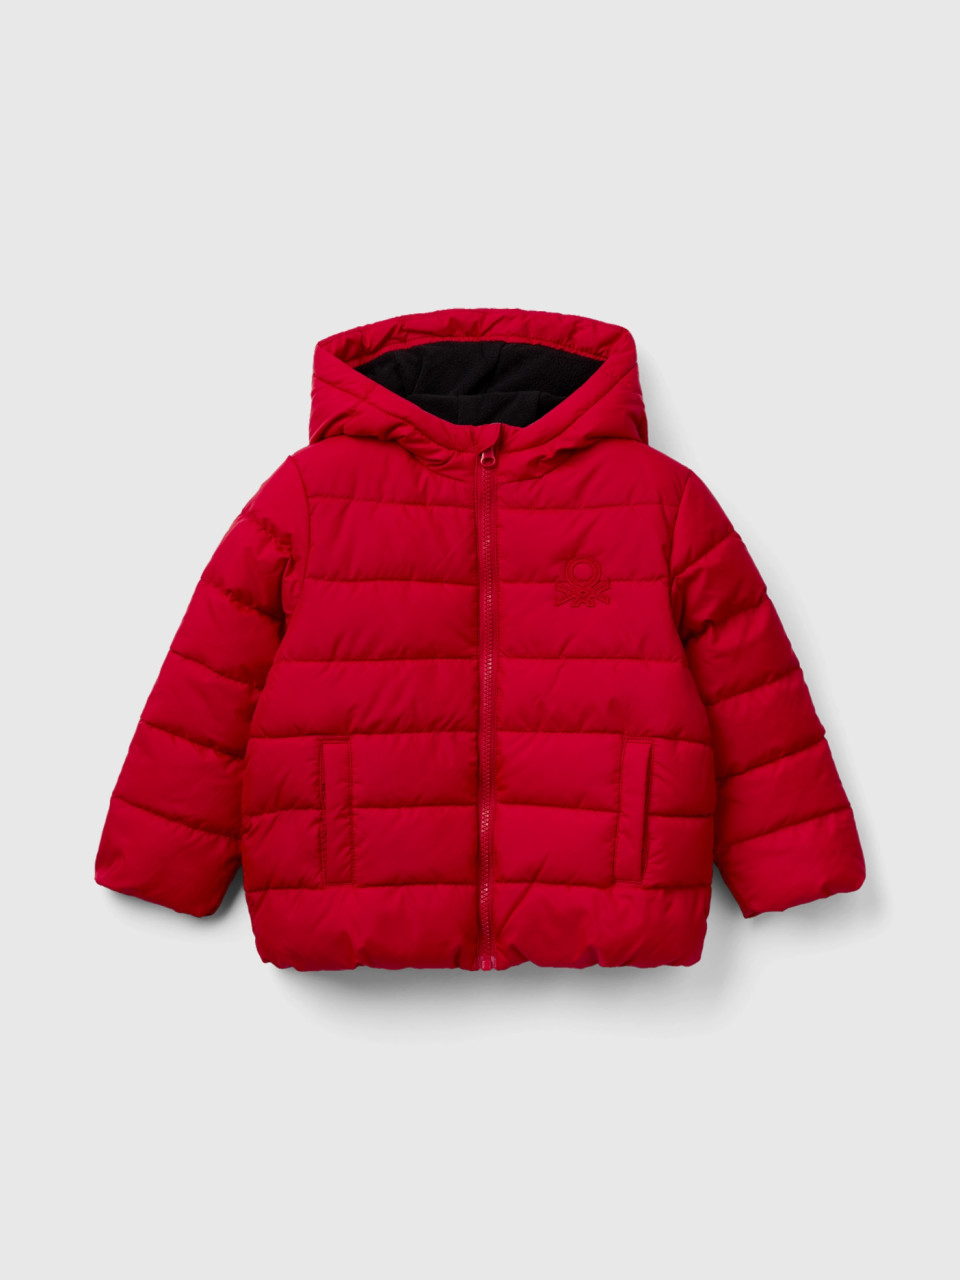 Benetton, Puffer Jacket With Hood And Logo, Red, Kids